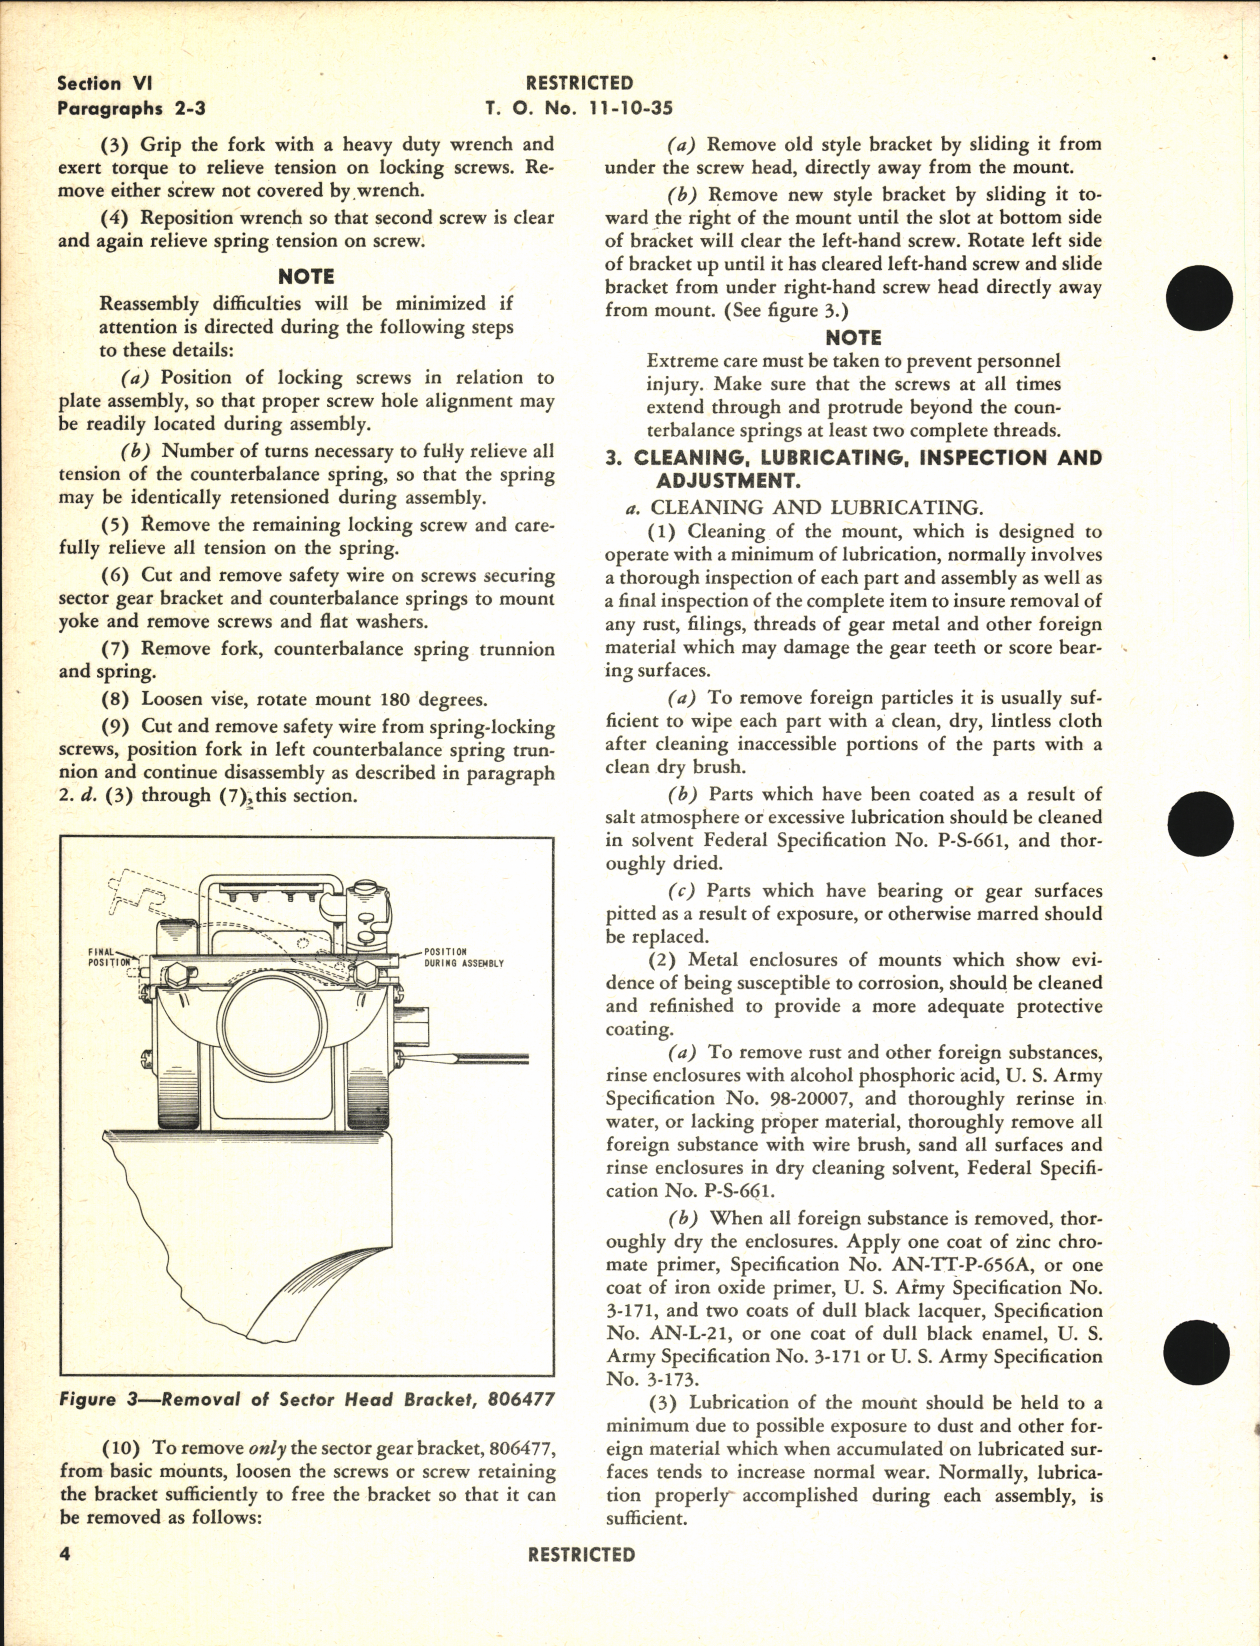 Sample page 8 from AirCorps Library document: Handbook of Instructions with Parts Catalog for Gun Mount Type K-7